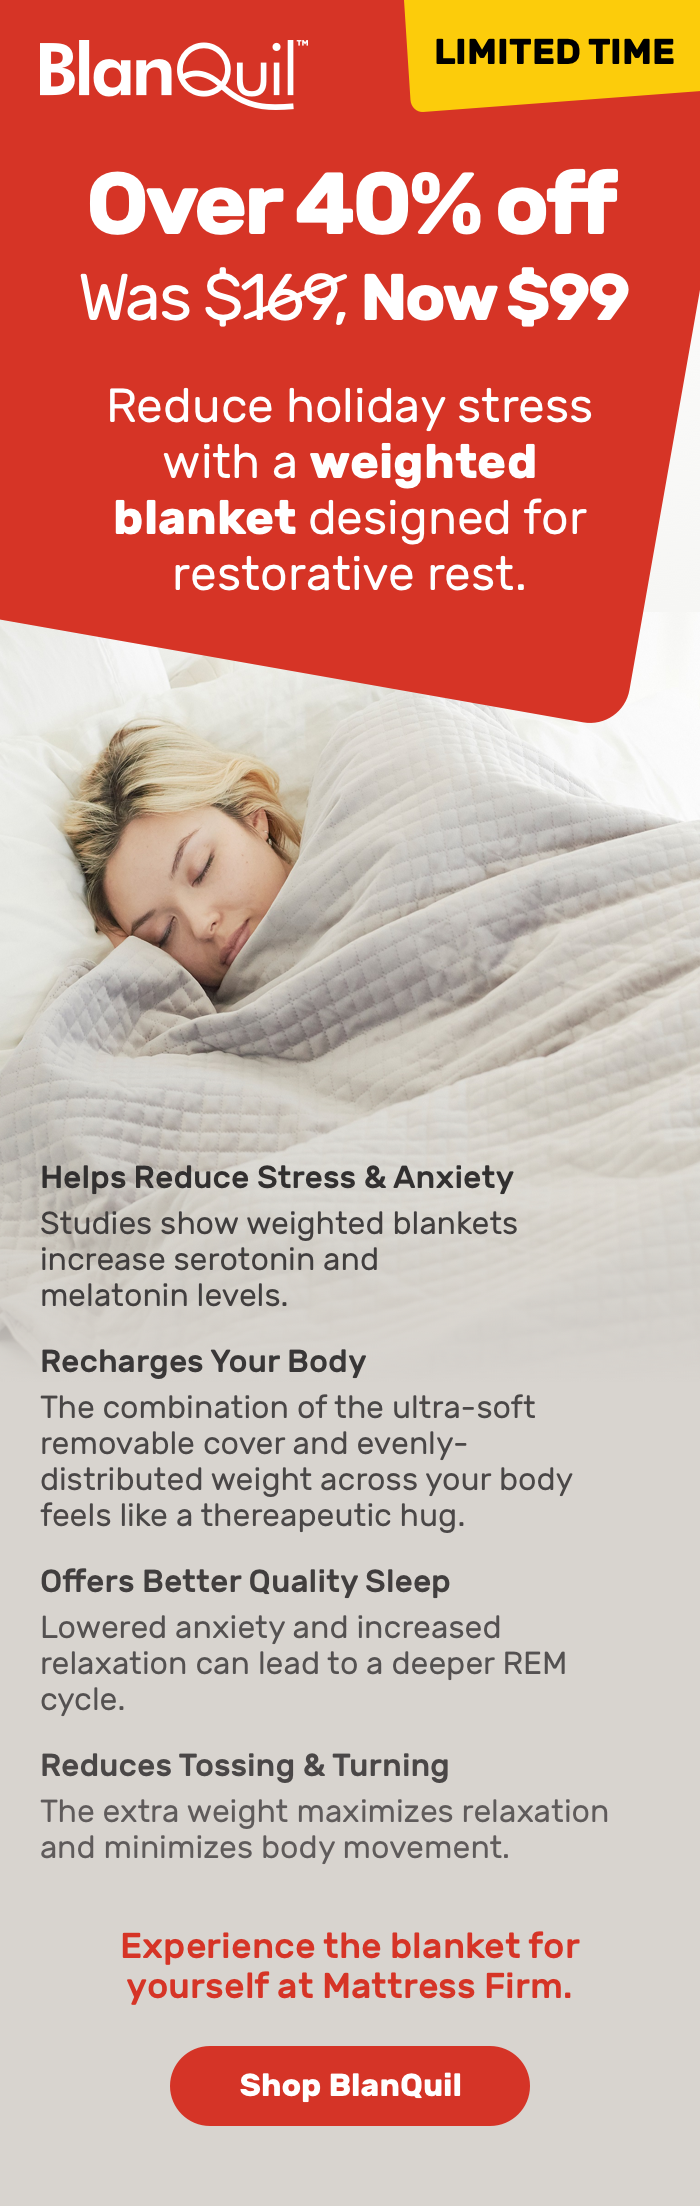 BlanQuil Limited Time Over 40% off. Reduce holiday stress with a weighted blanket designed for restorative rest. 